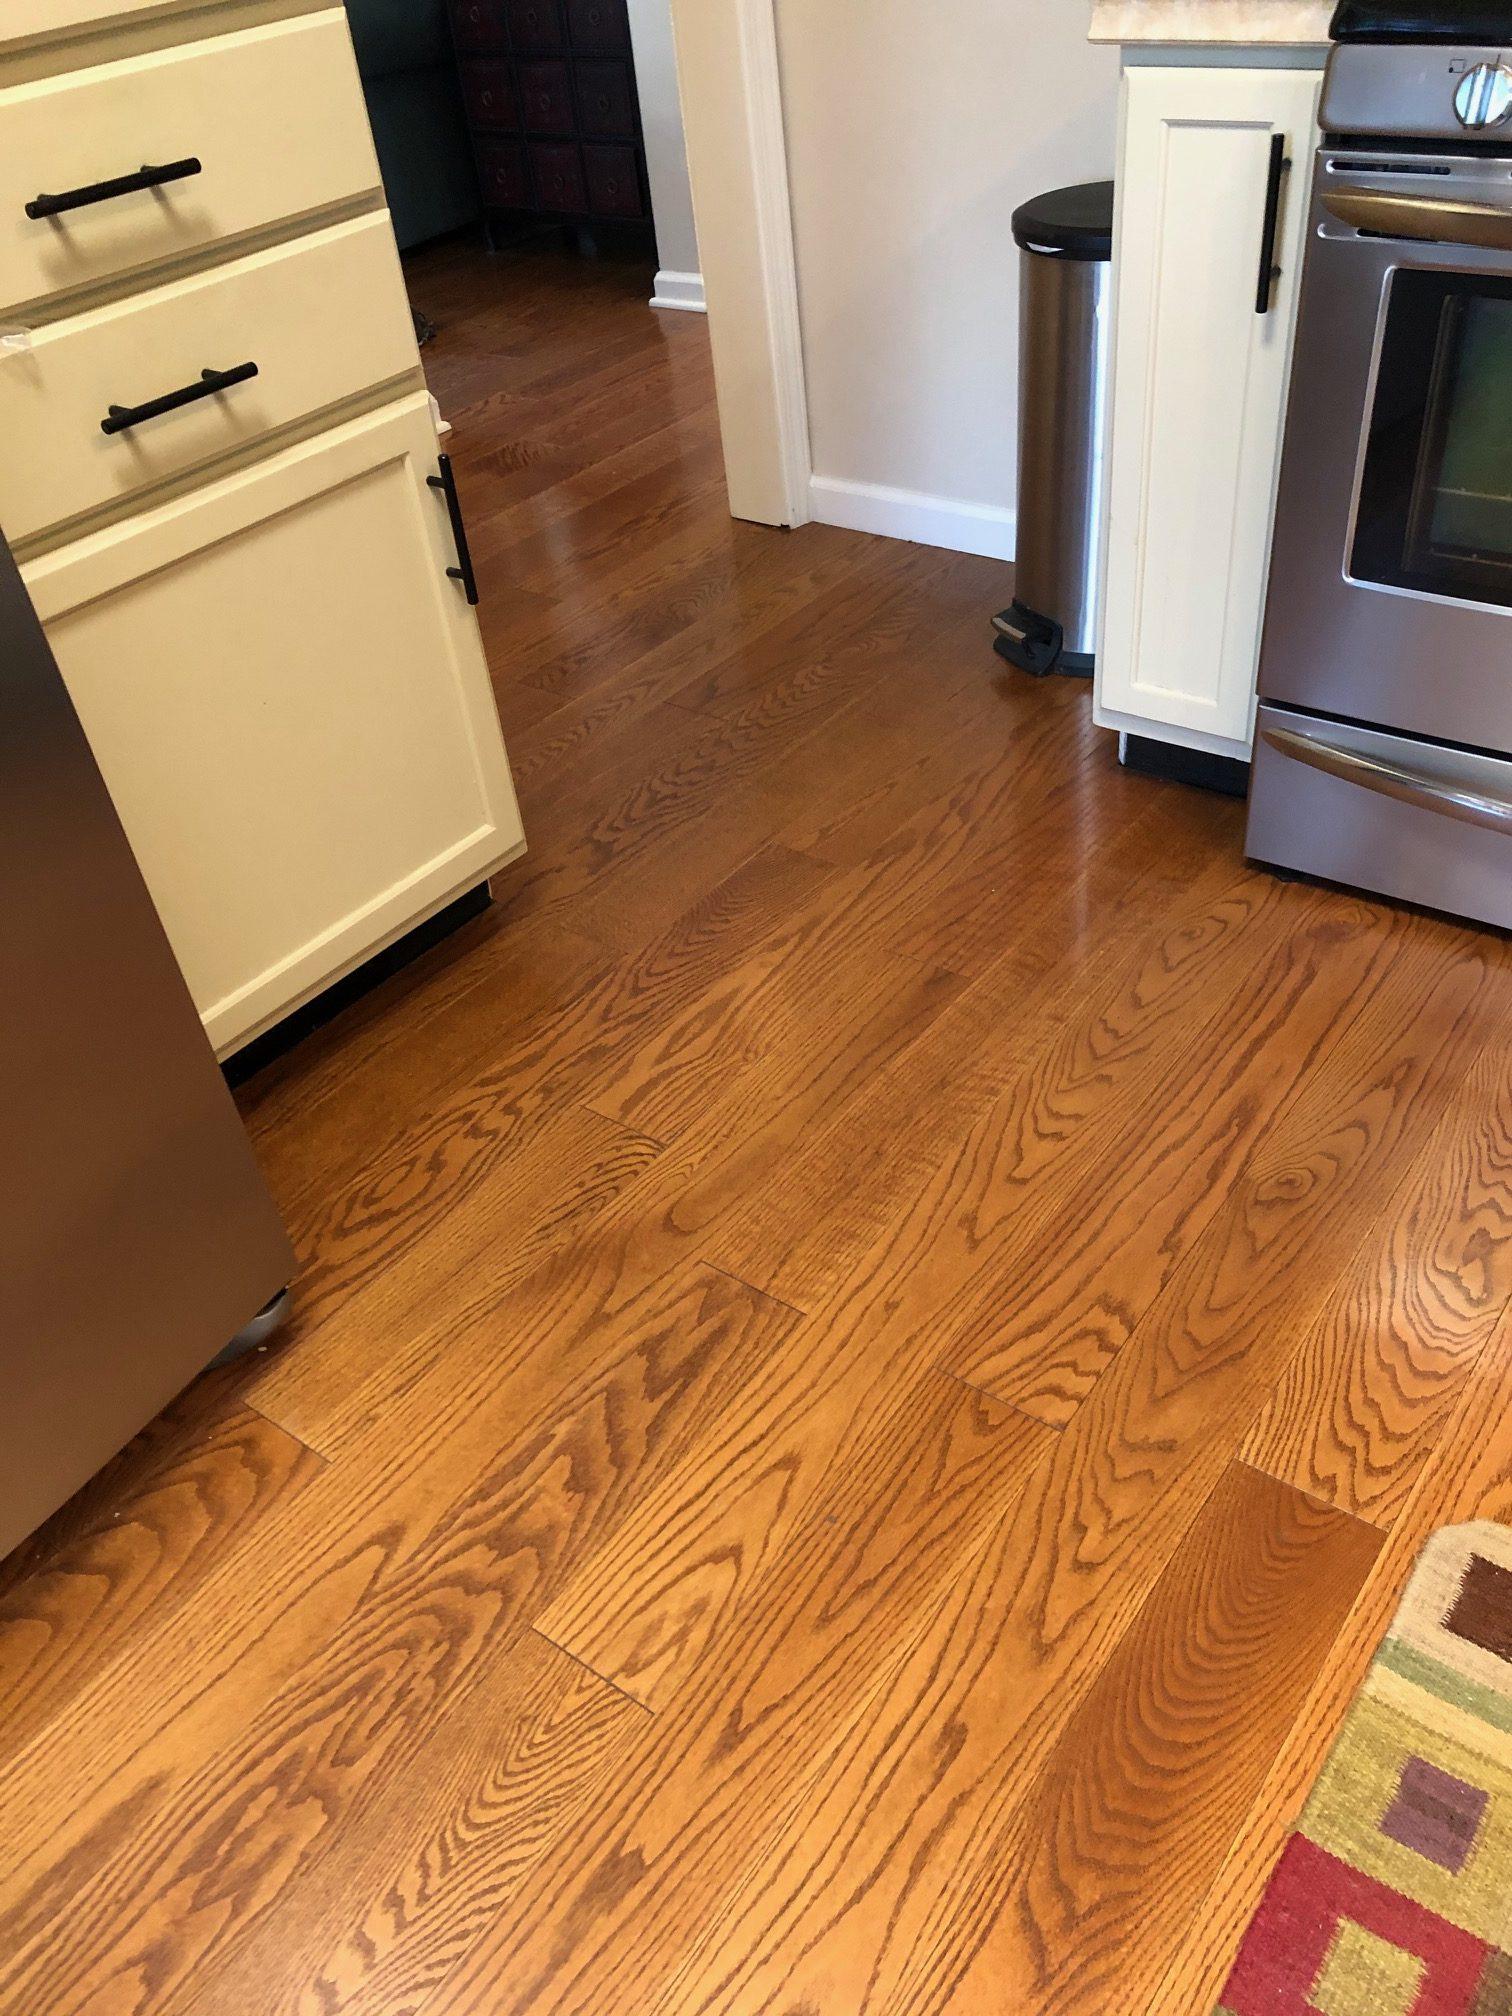 Rochester Flooring Plus - Flooring Services in Rochester NY - Wood Floor Project - Image 001